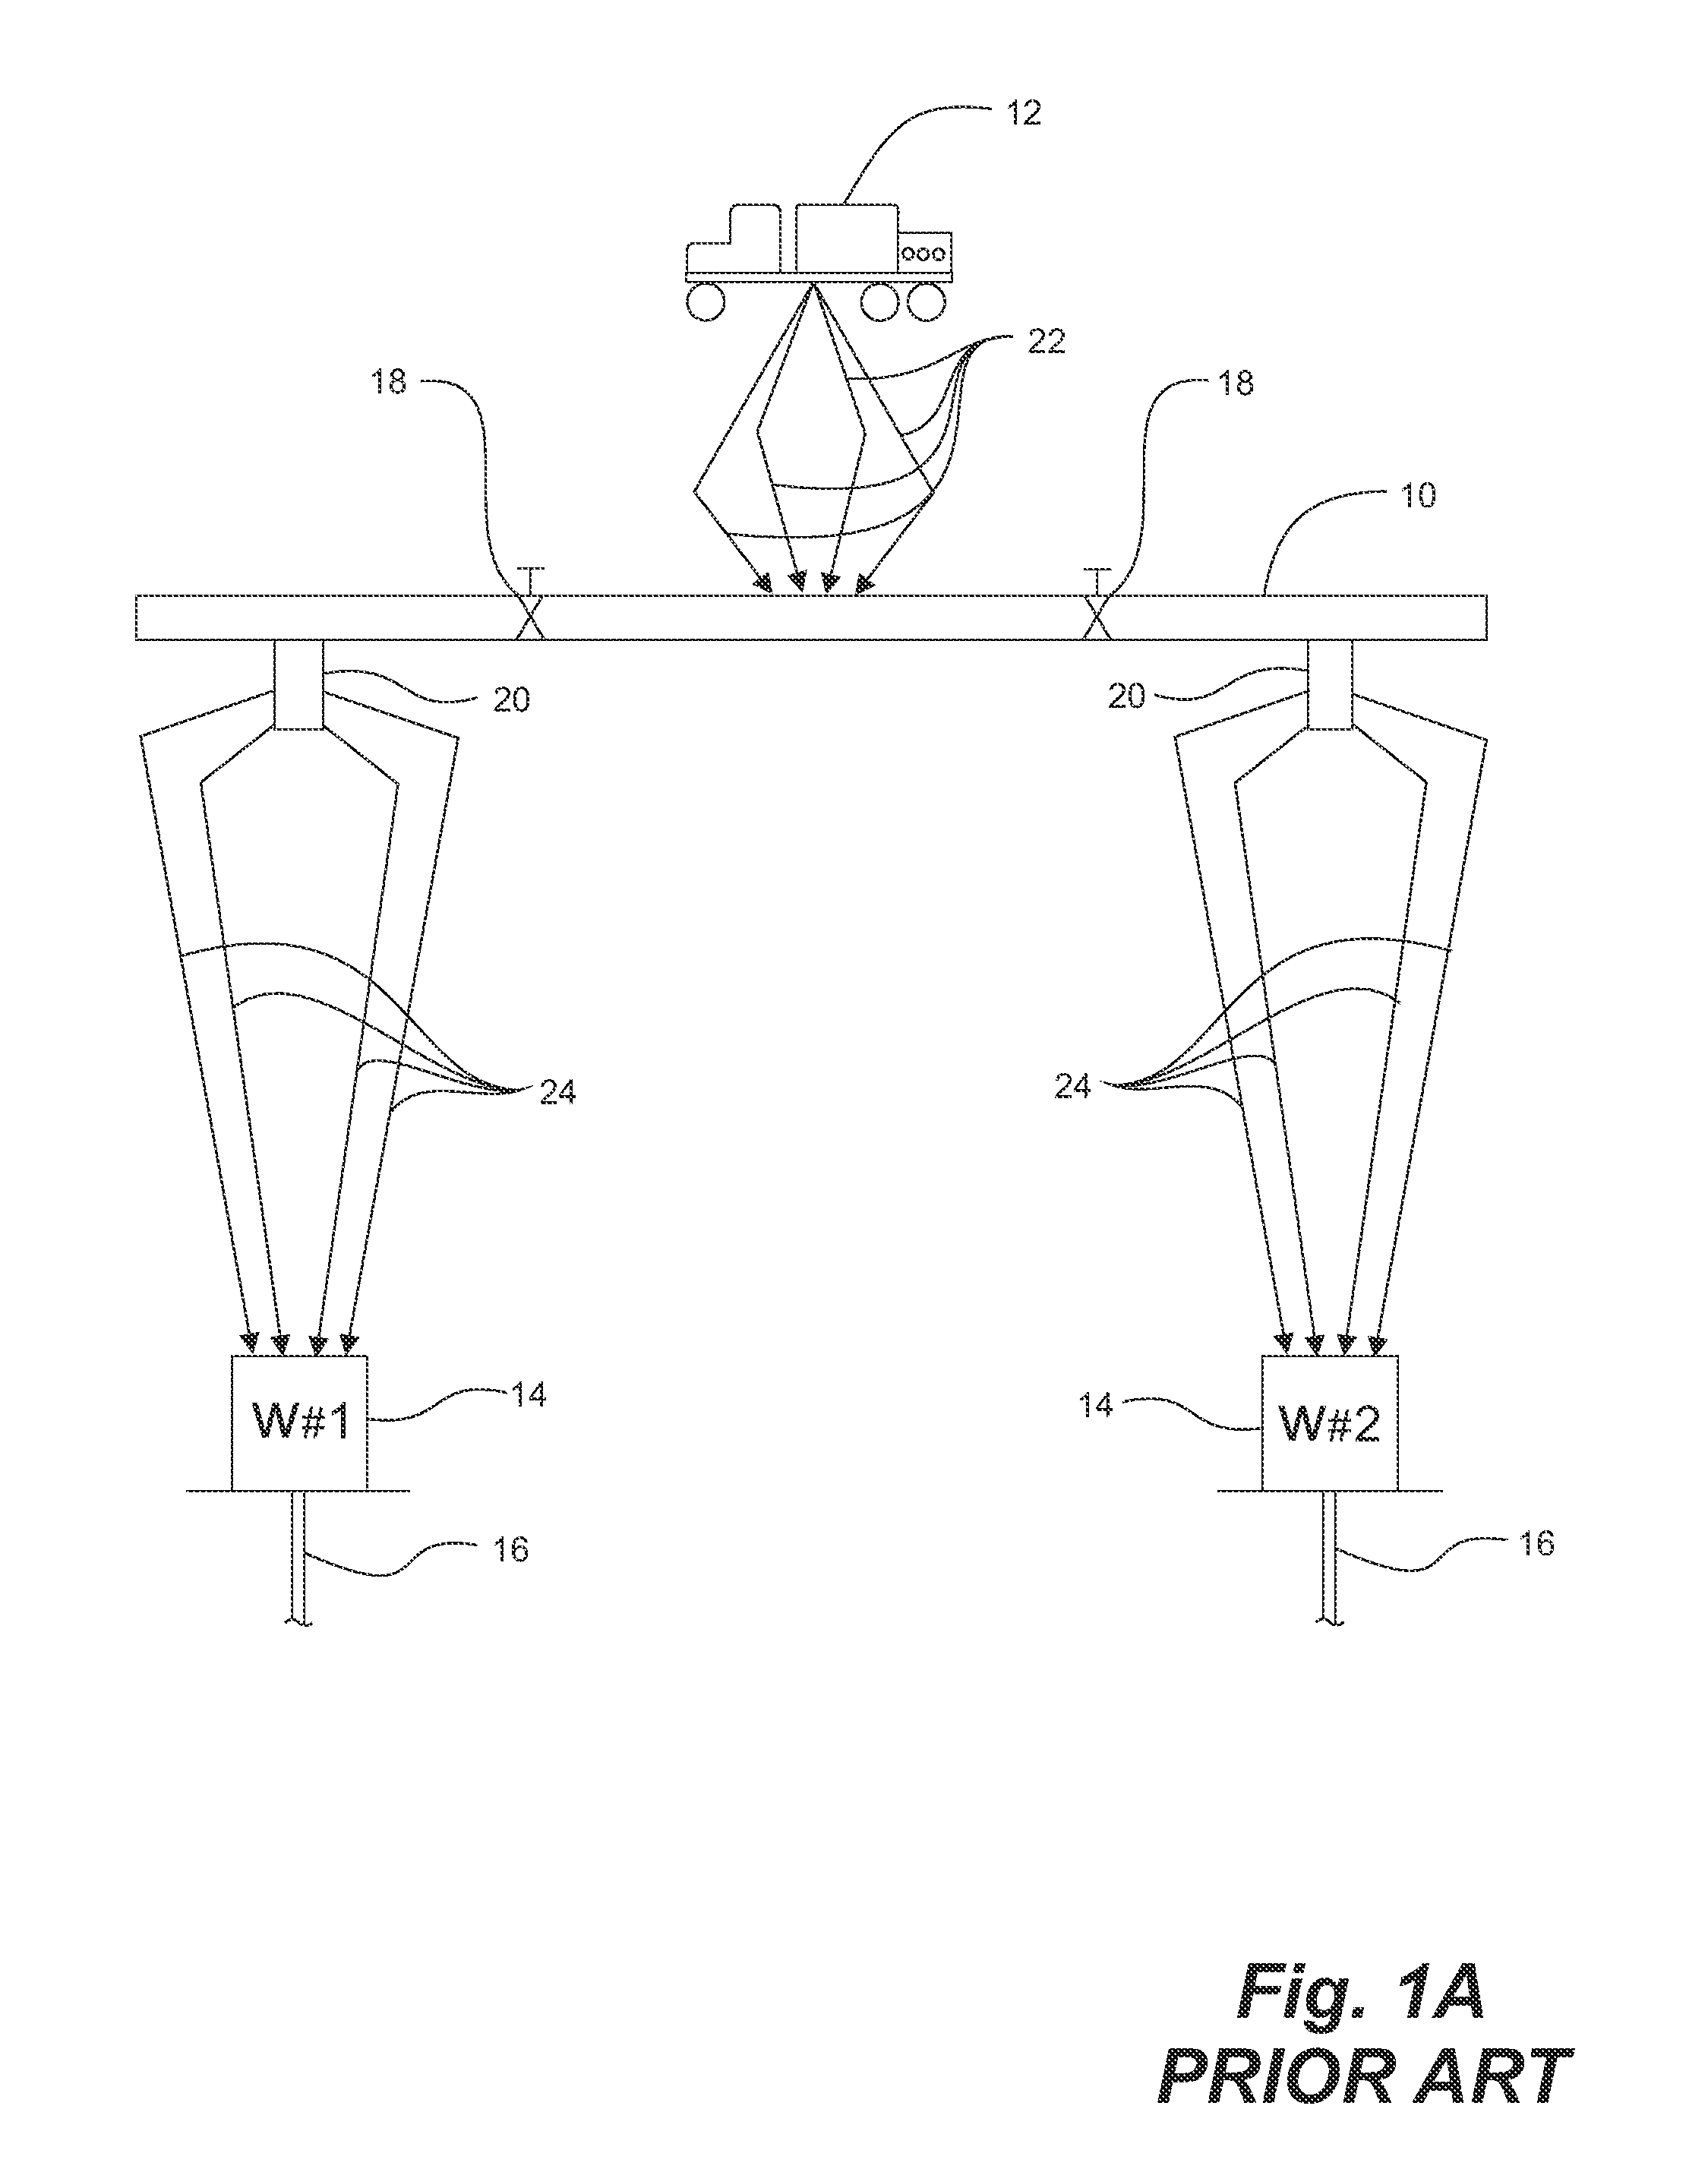 Manifold and system for servicing multiple wells